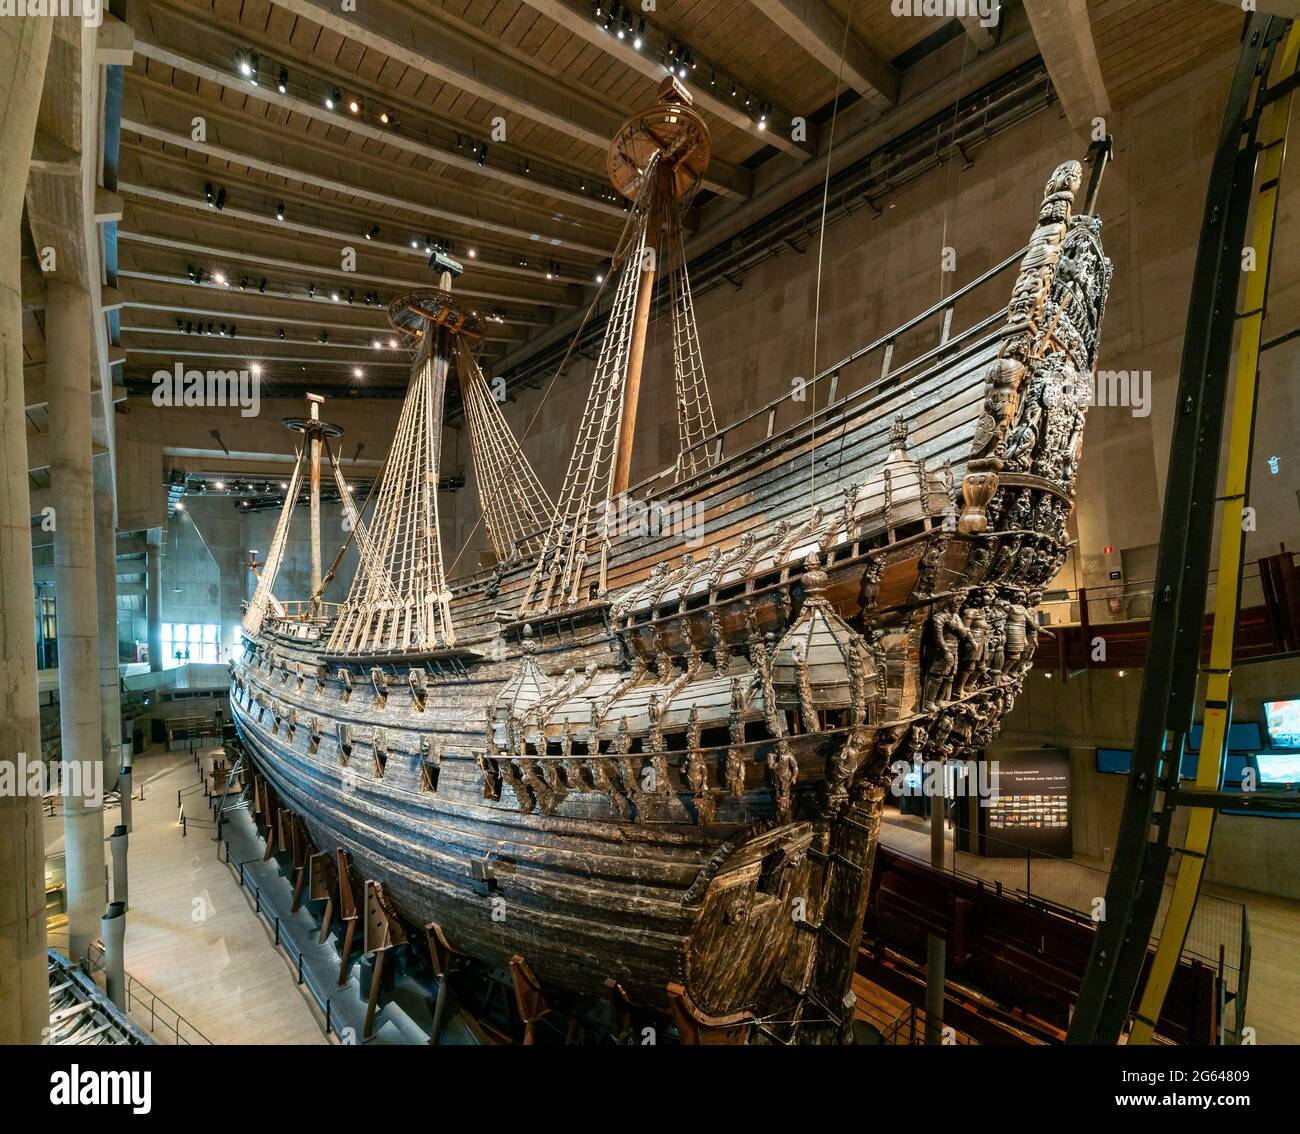 Stockholm, Sweden - 24 June, 2021: view of the 17-th century Vasa warship in the Vasa Museum in Stockholm Stock Photo